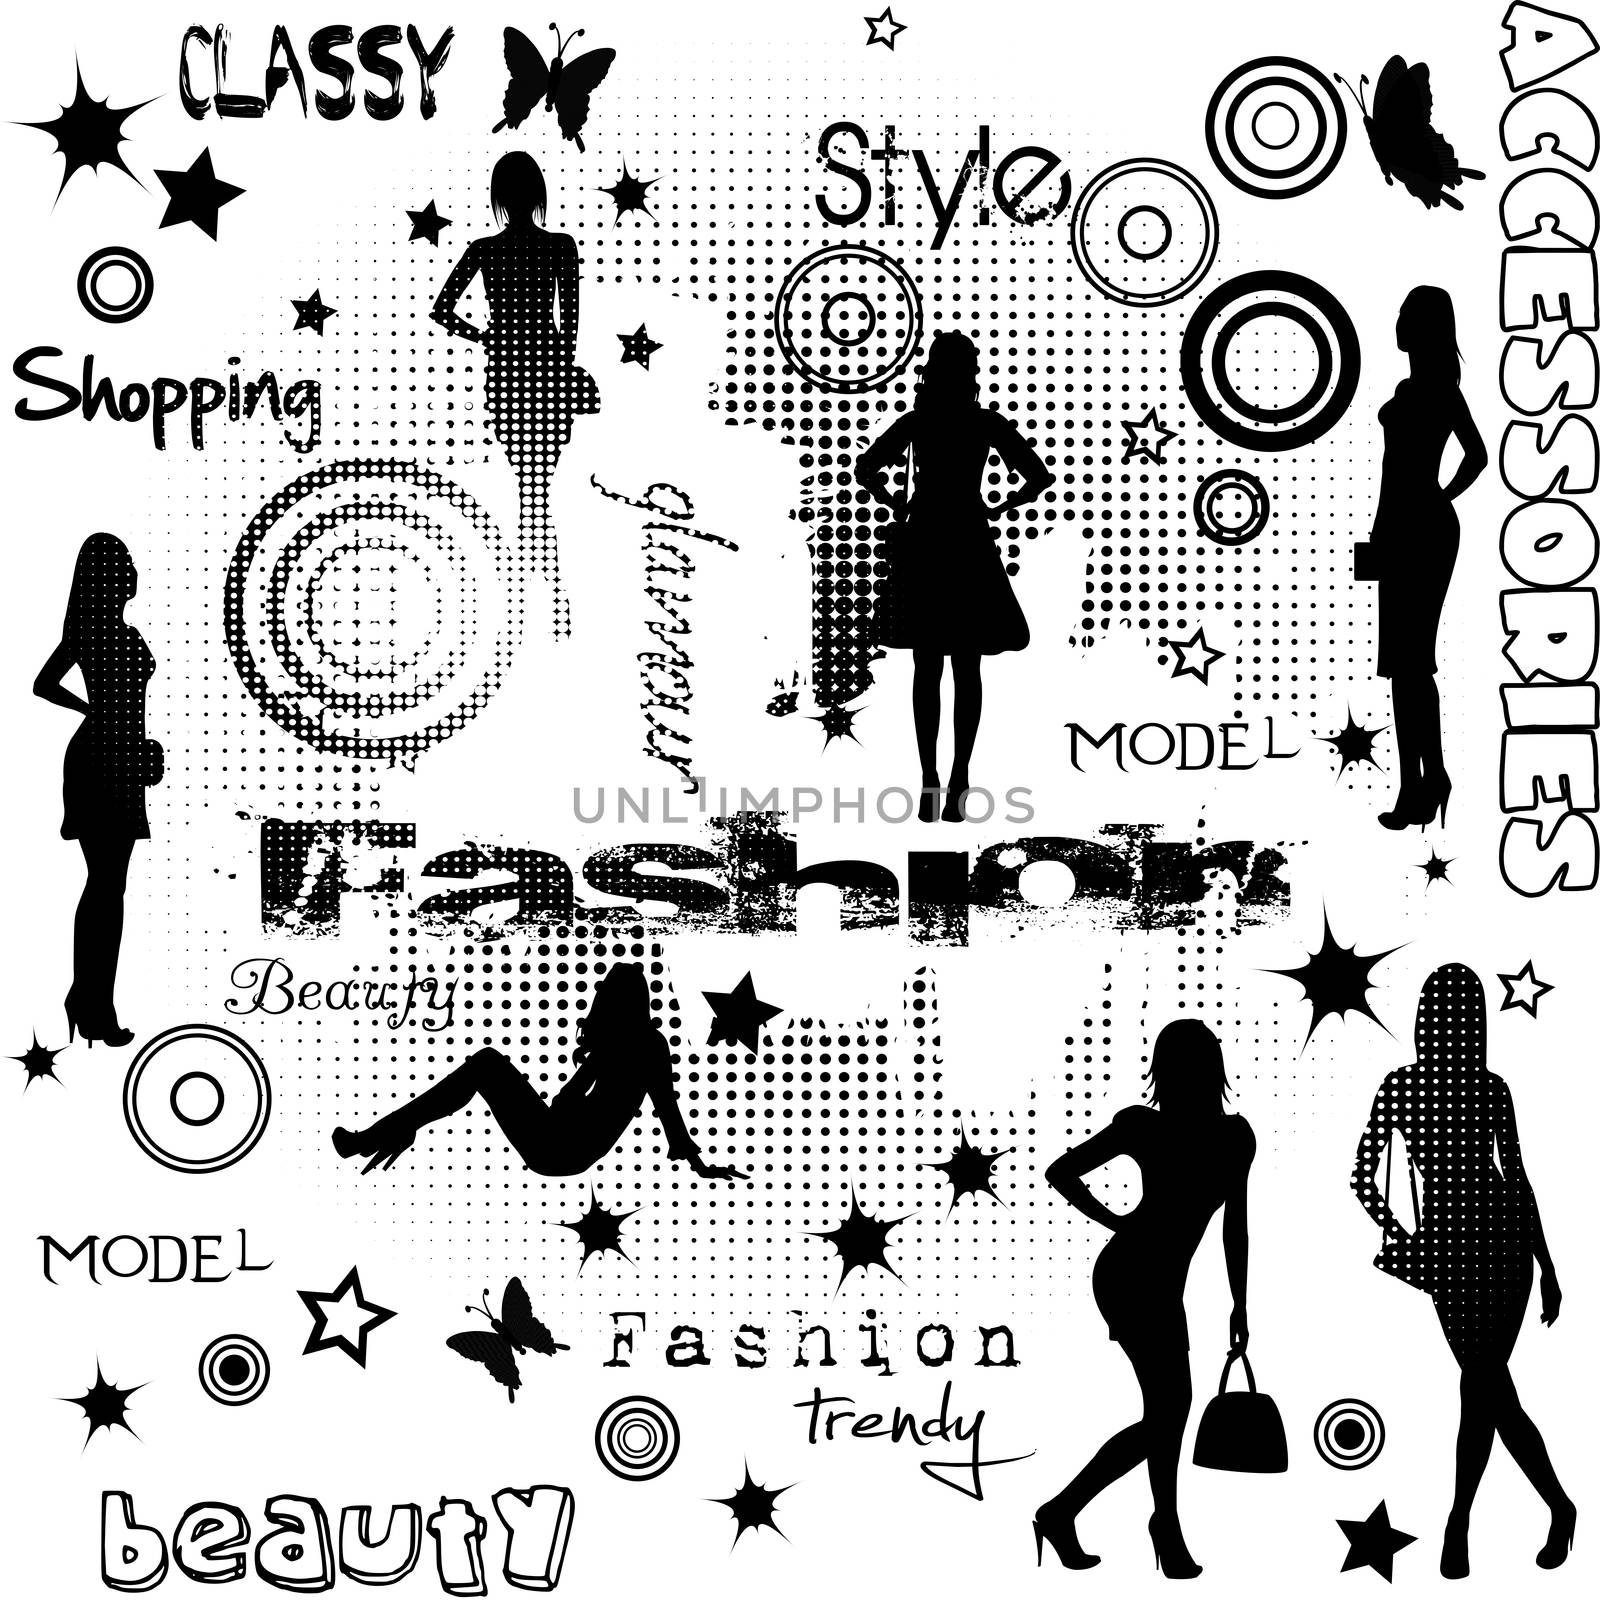 Fashion advertisement with women silhouettes by hibrida13